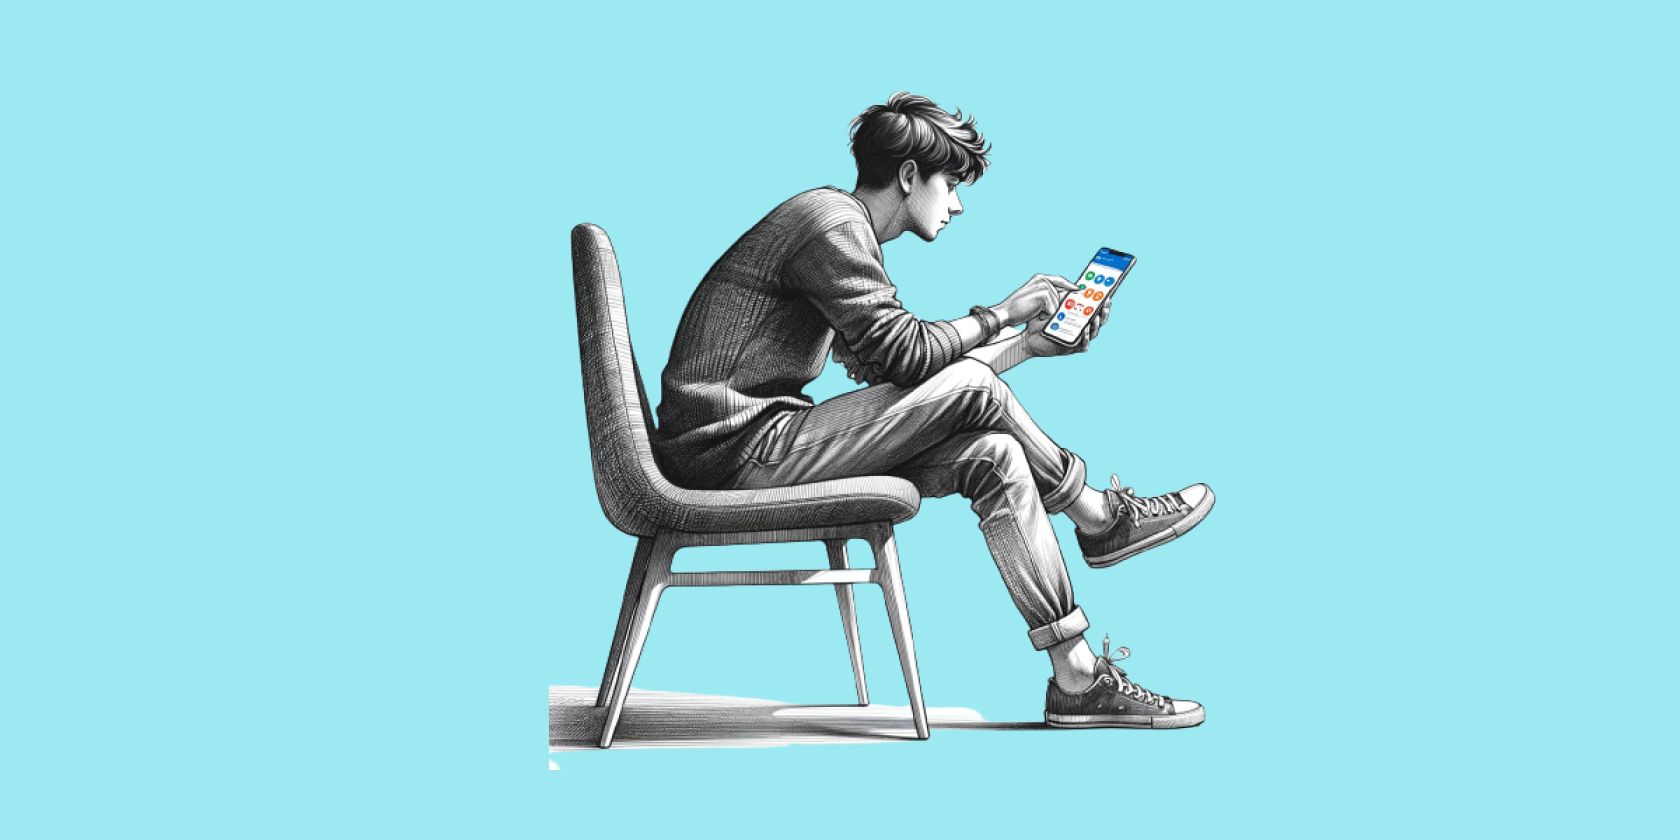 An illustration of a person seated comfortably on a modern chair, engrossed in using their smartphone